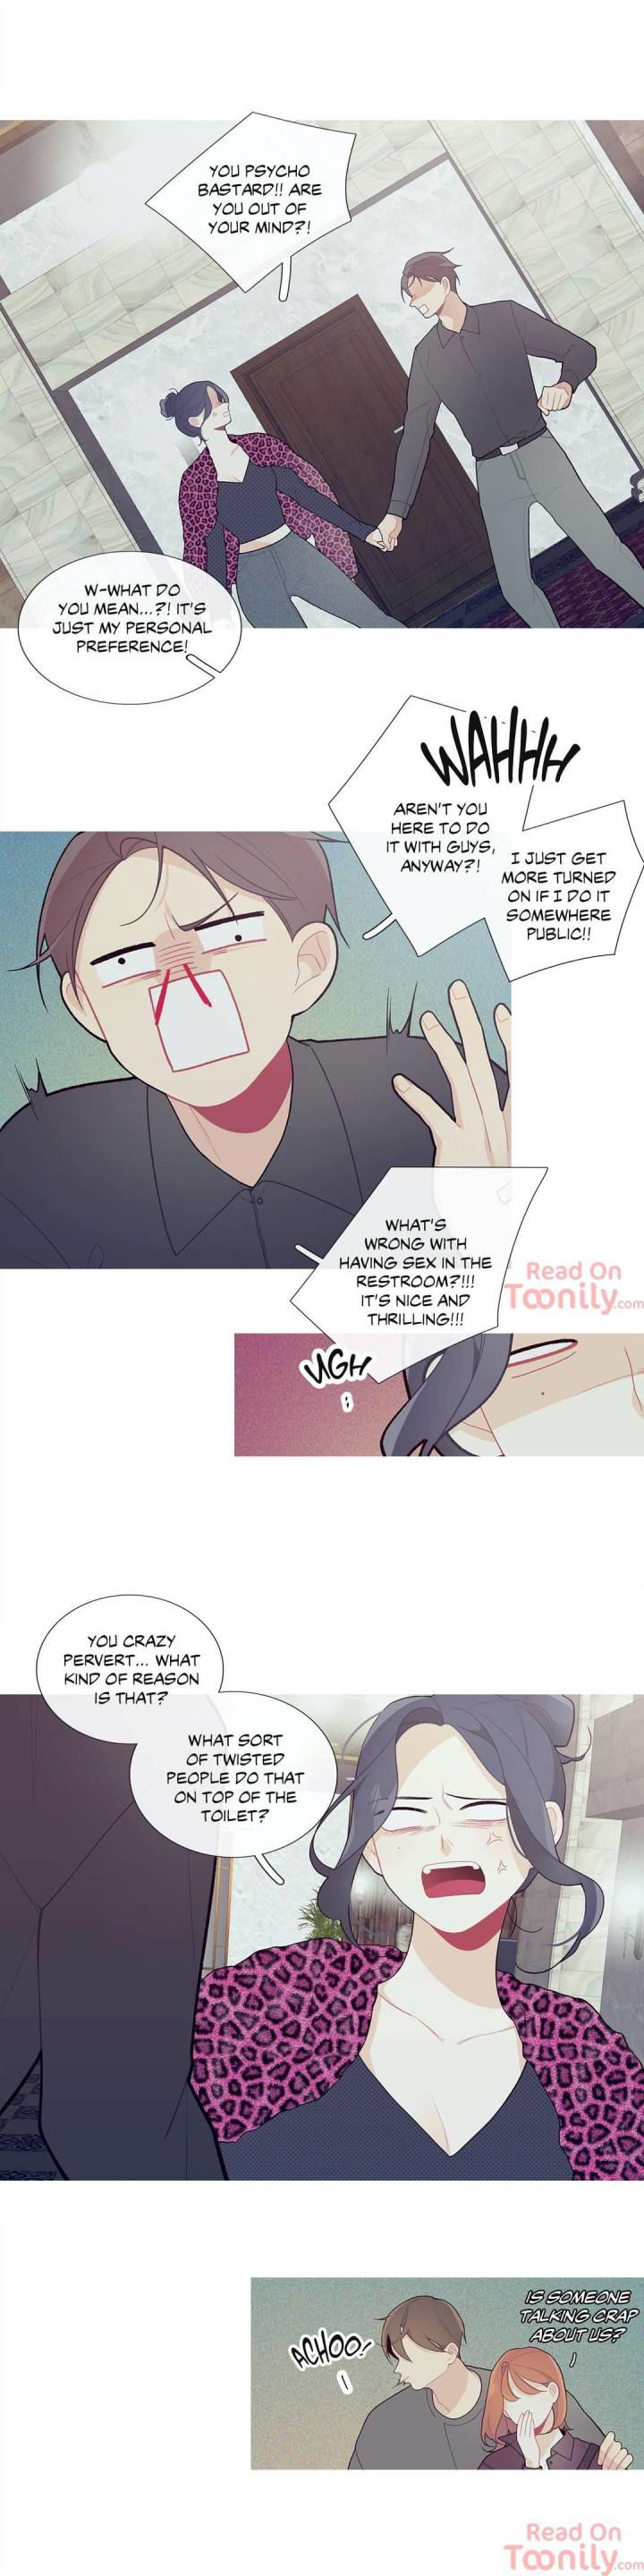 whats-going-on-chap-34-3